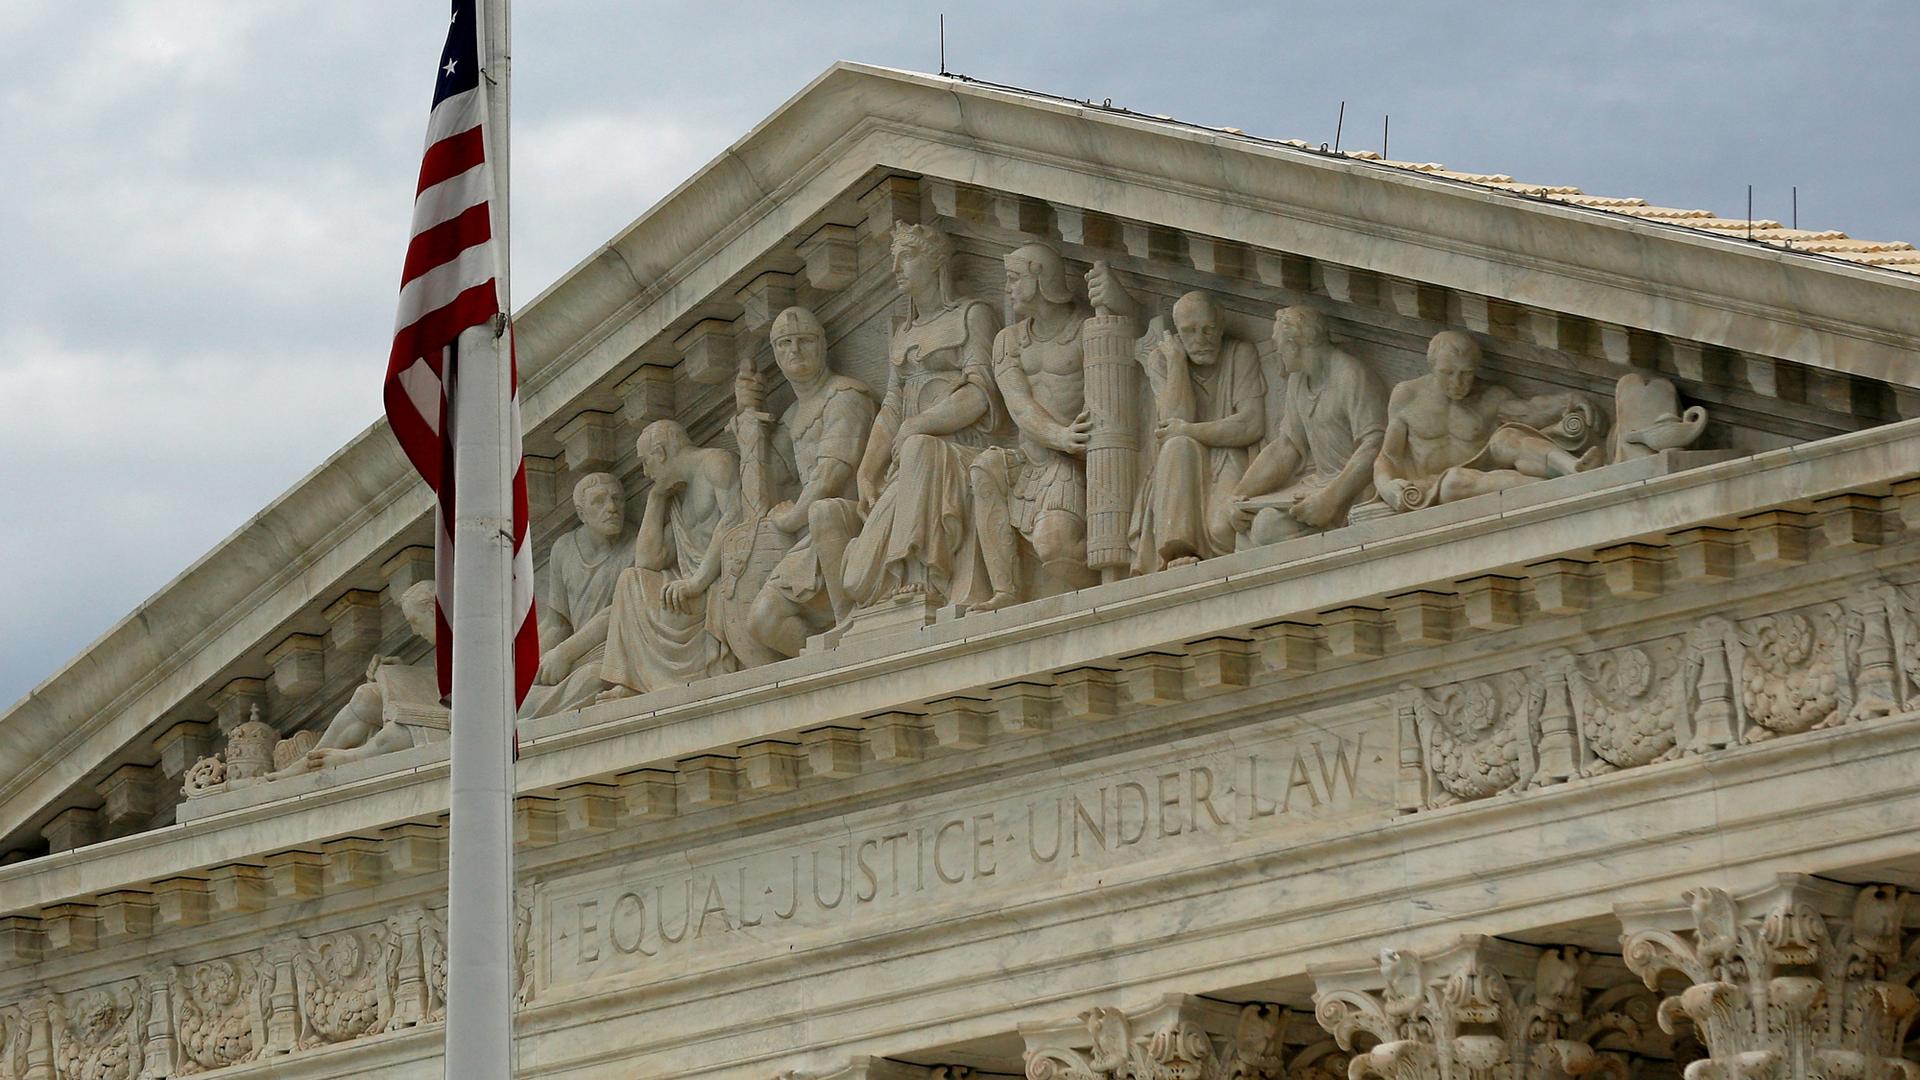 A view of the US Supreme Court building in Washington, DC.